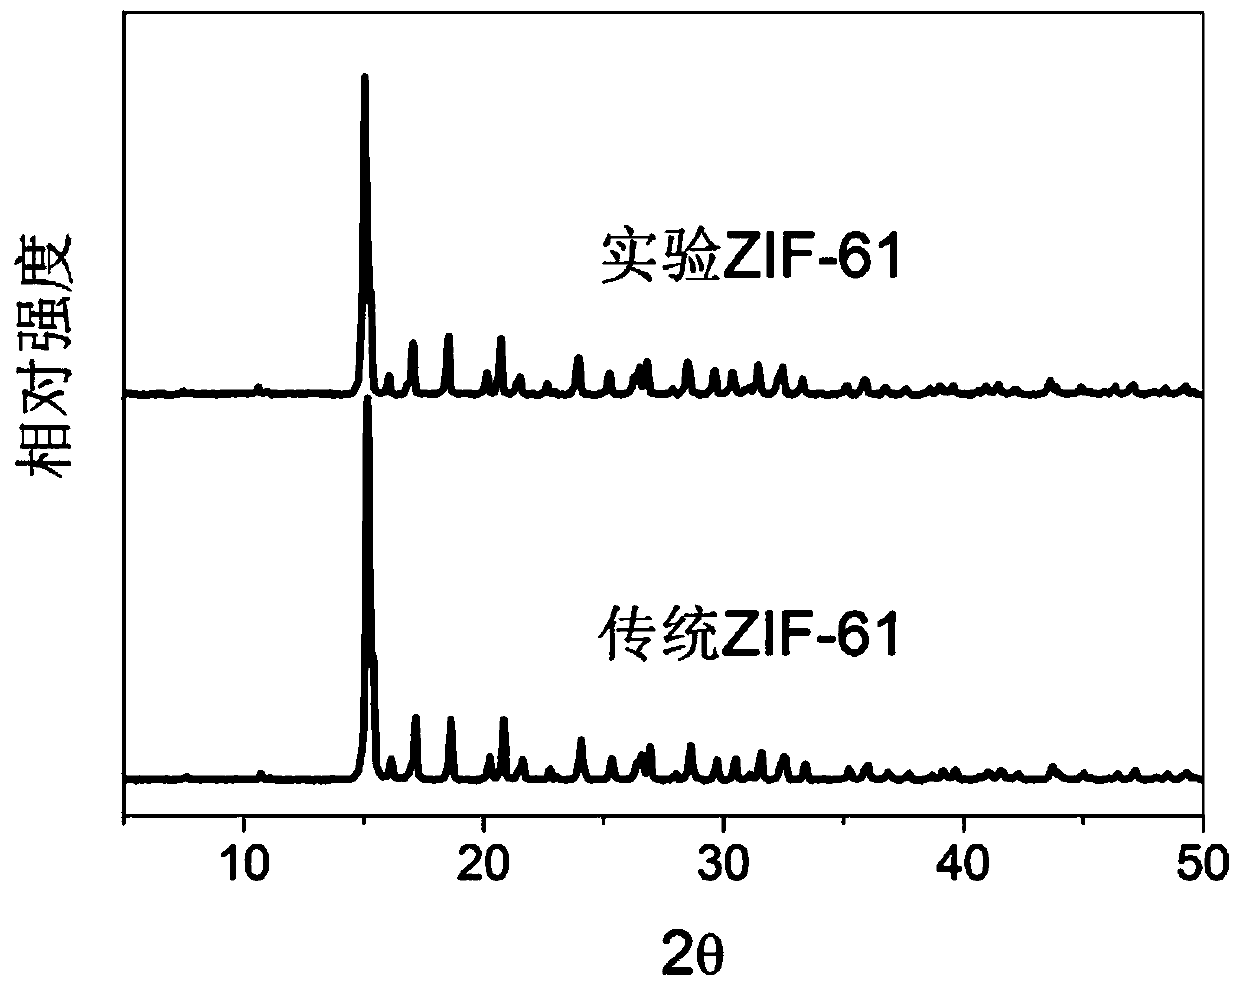 A method for rapidly synthesizing zif-61 materials